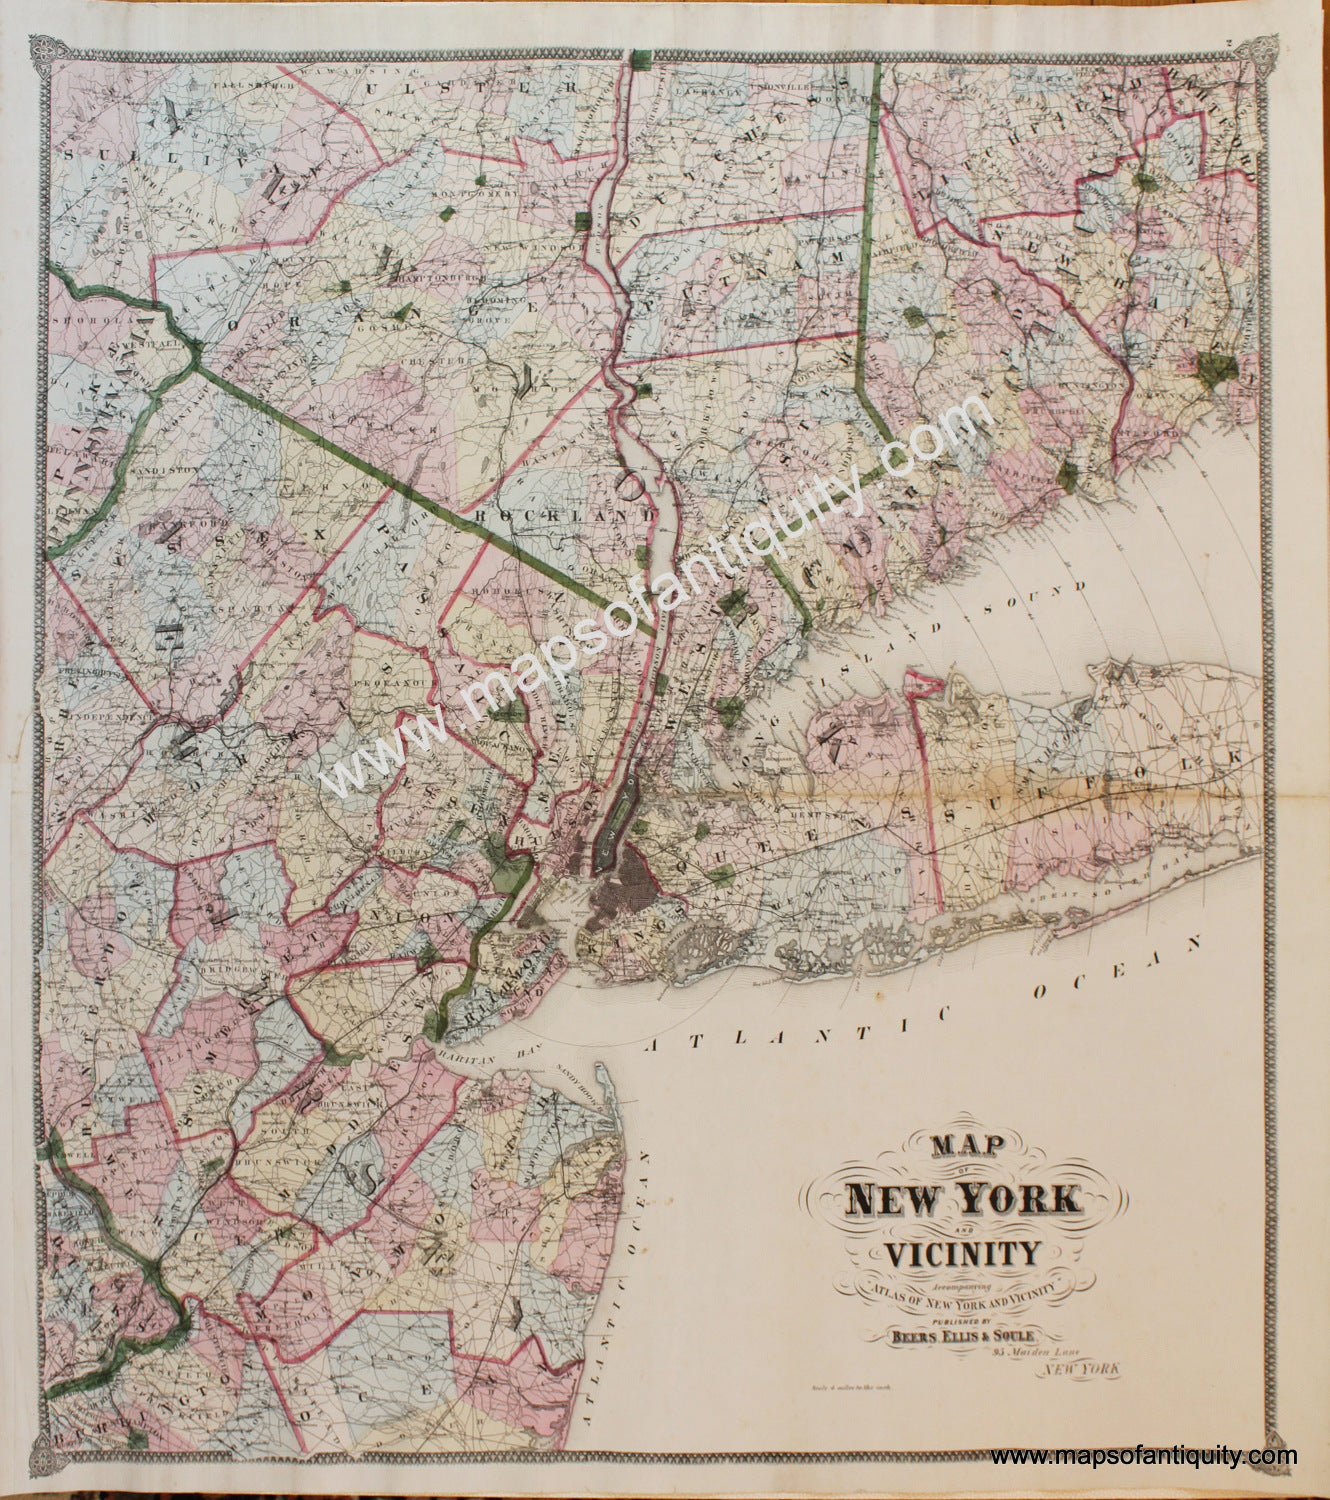 Antique-Hand-Colored-Map-Map-of-New-York-and-Vicinity-United-States-Northeast-1872-Beers-Maps-Of-Antiquity